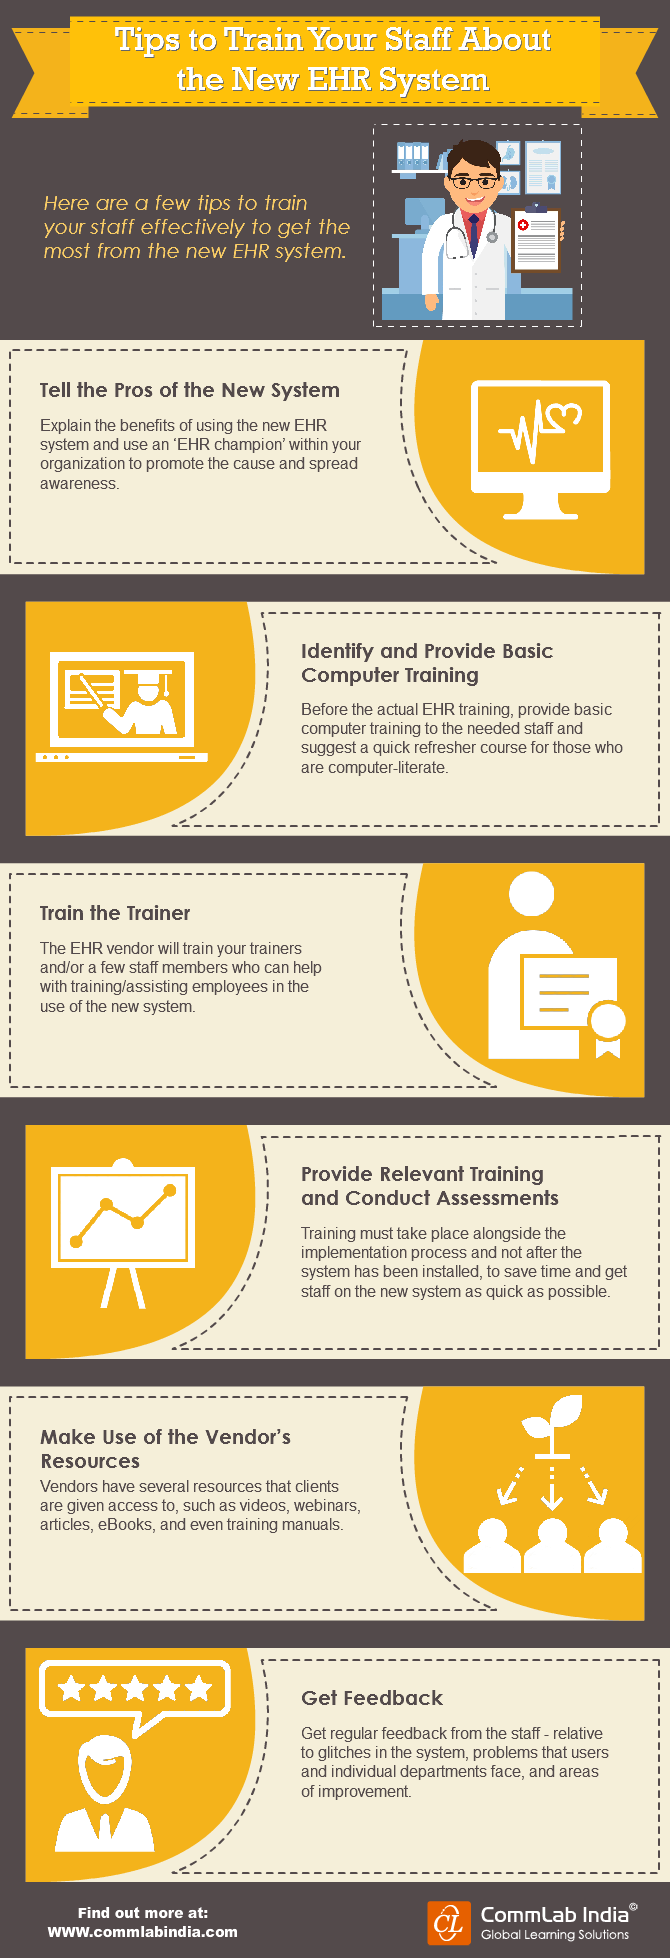 Tips to Train Your Staff about the New EHR System [Infographic]